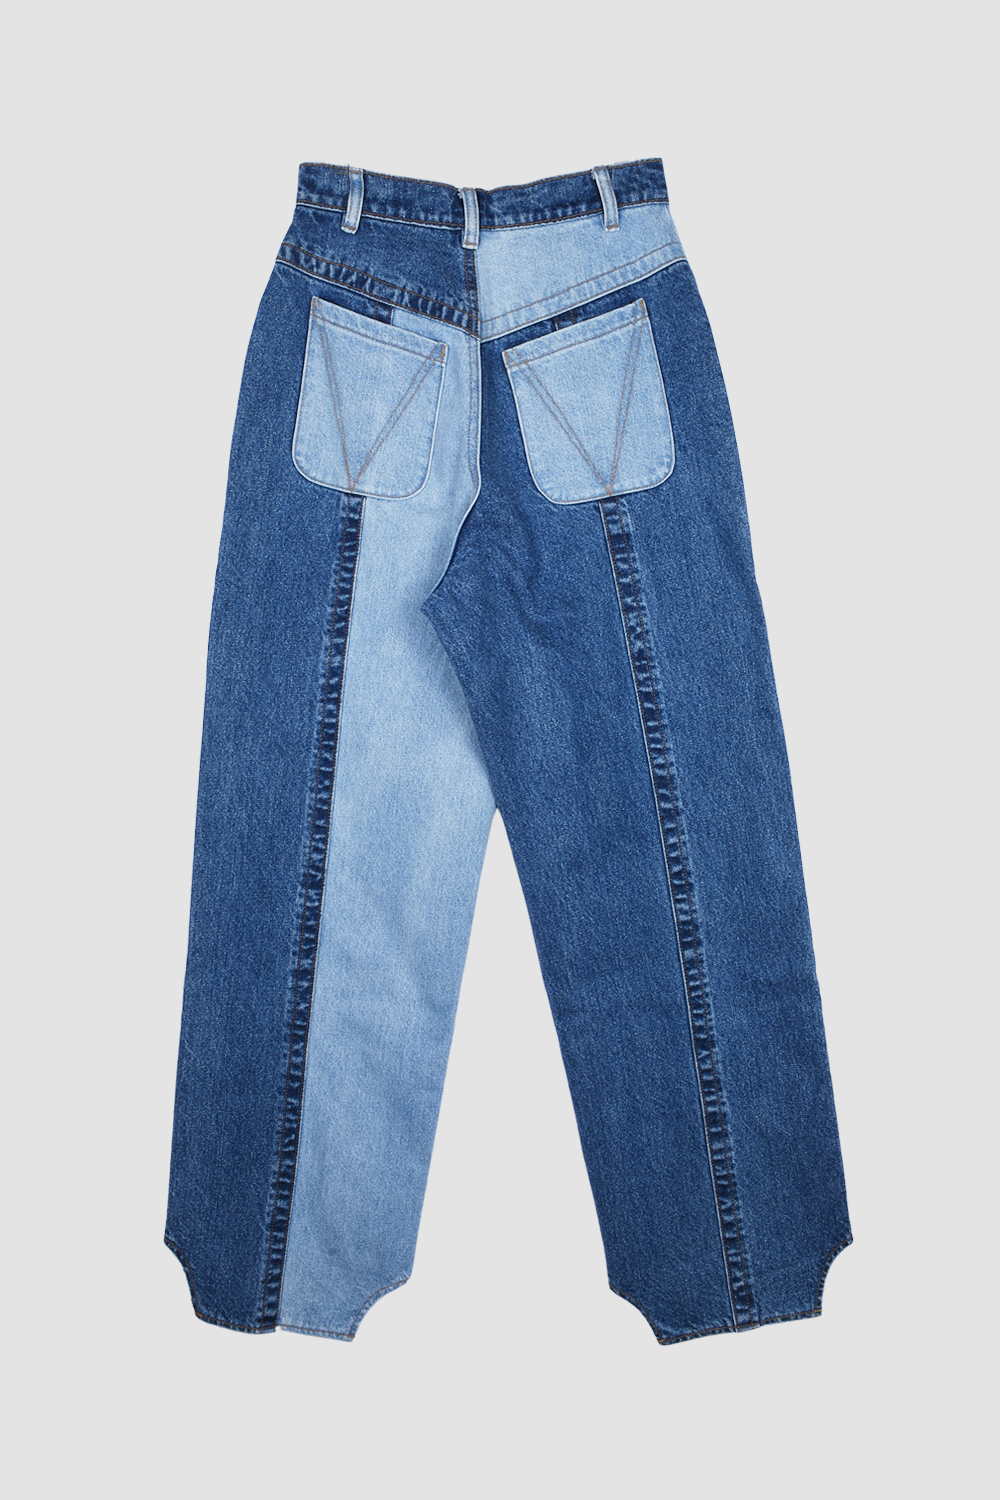 WASHED SWITCHED DENIM PANTS / BLUE